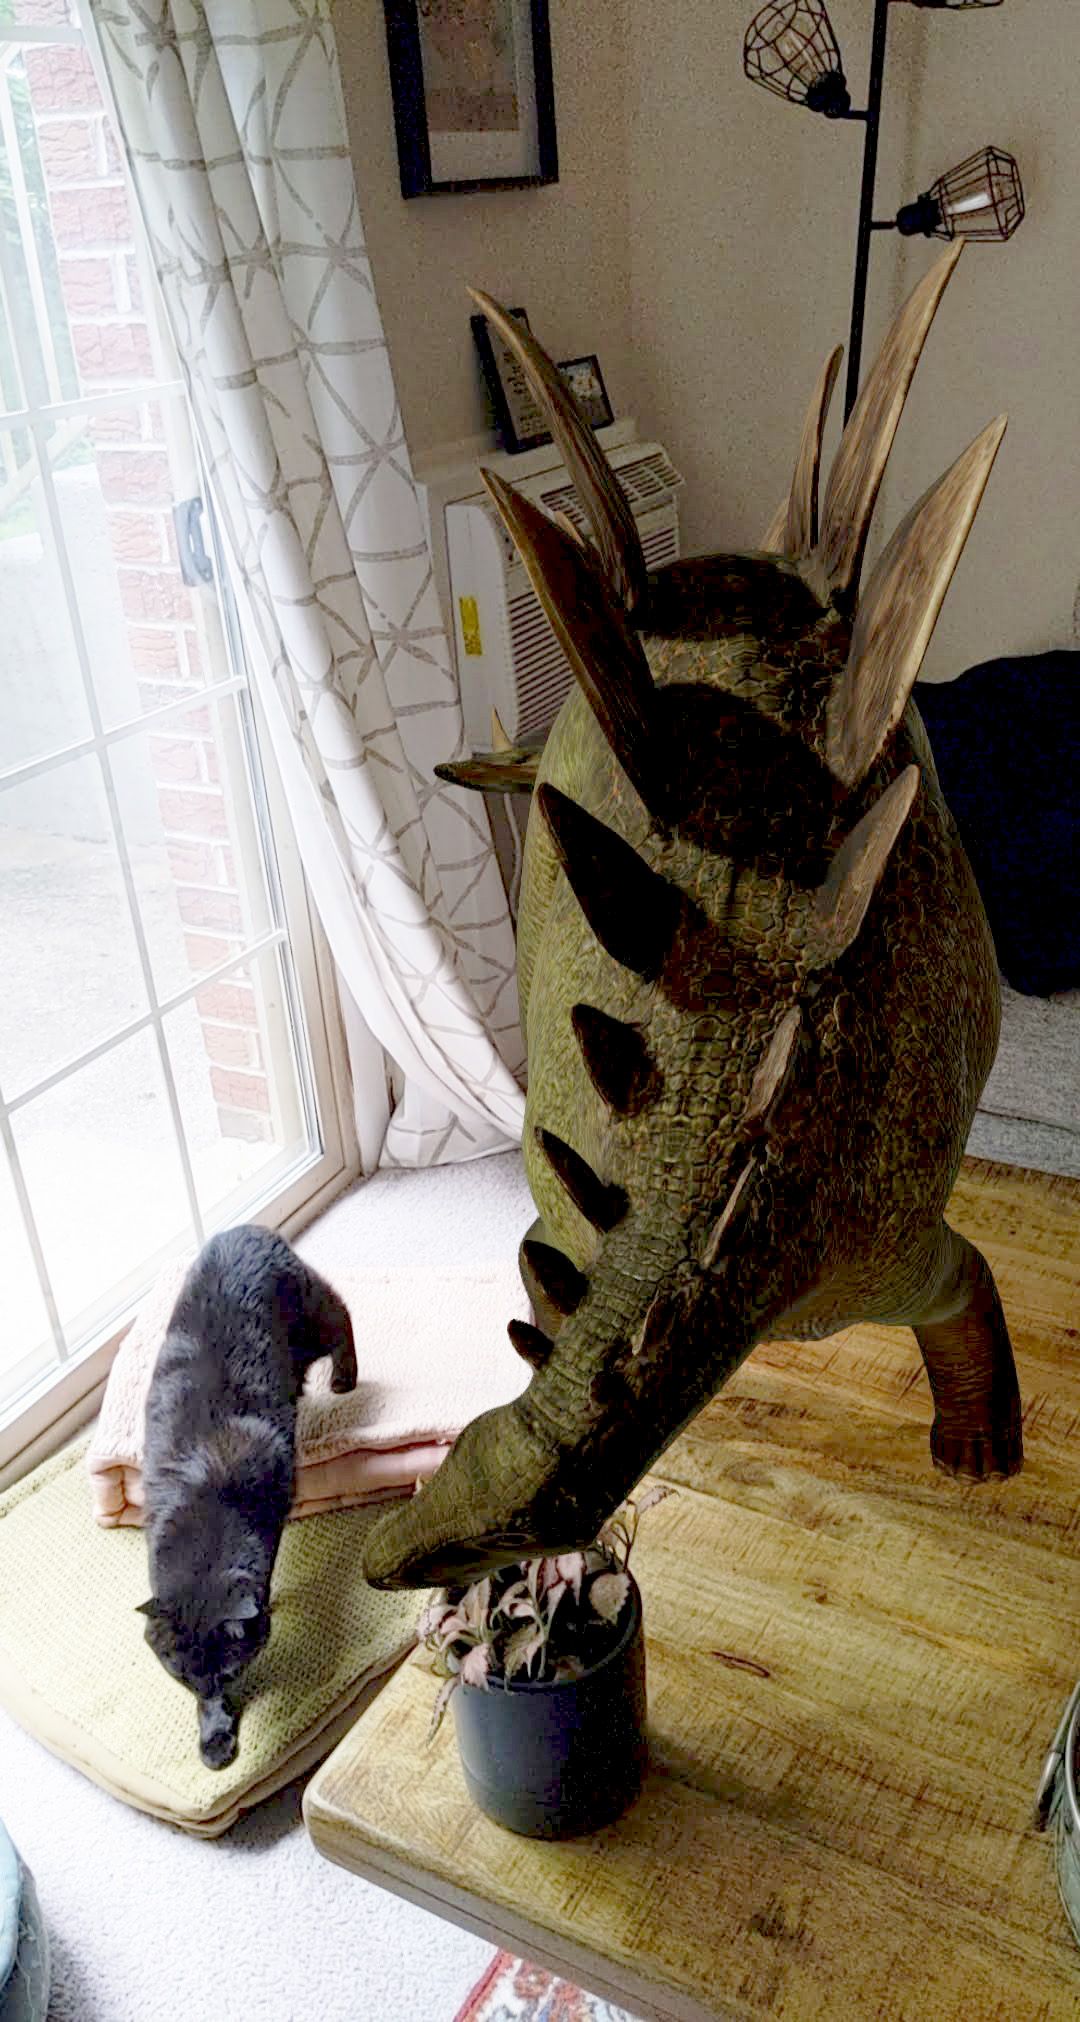 Google 3D Animals Dinosaur: Google 'View in 3D' gets 10 dinosaur options -  How to watch AR dinosaurs at home